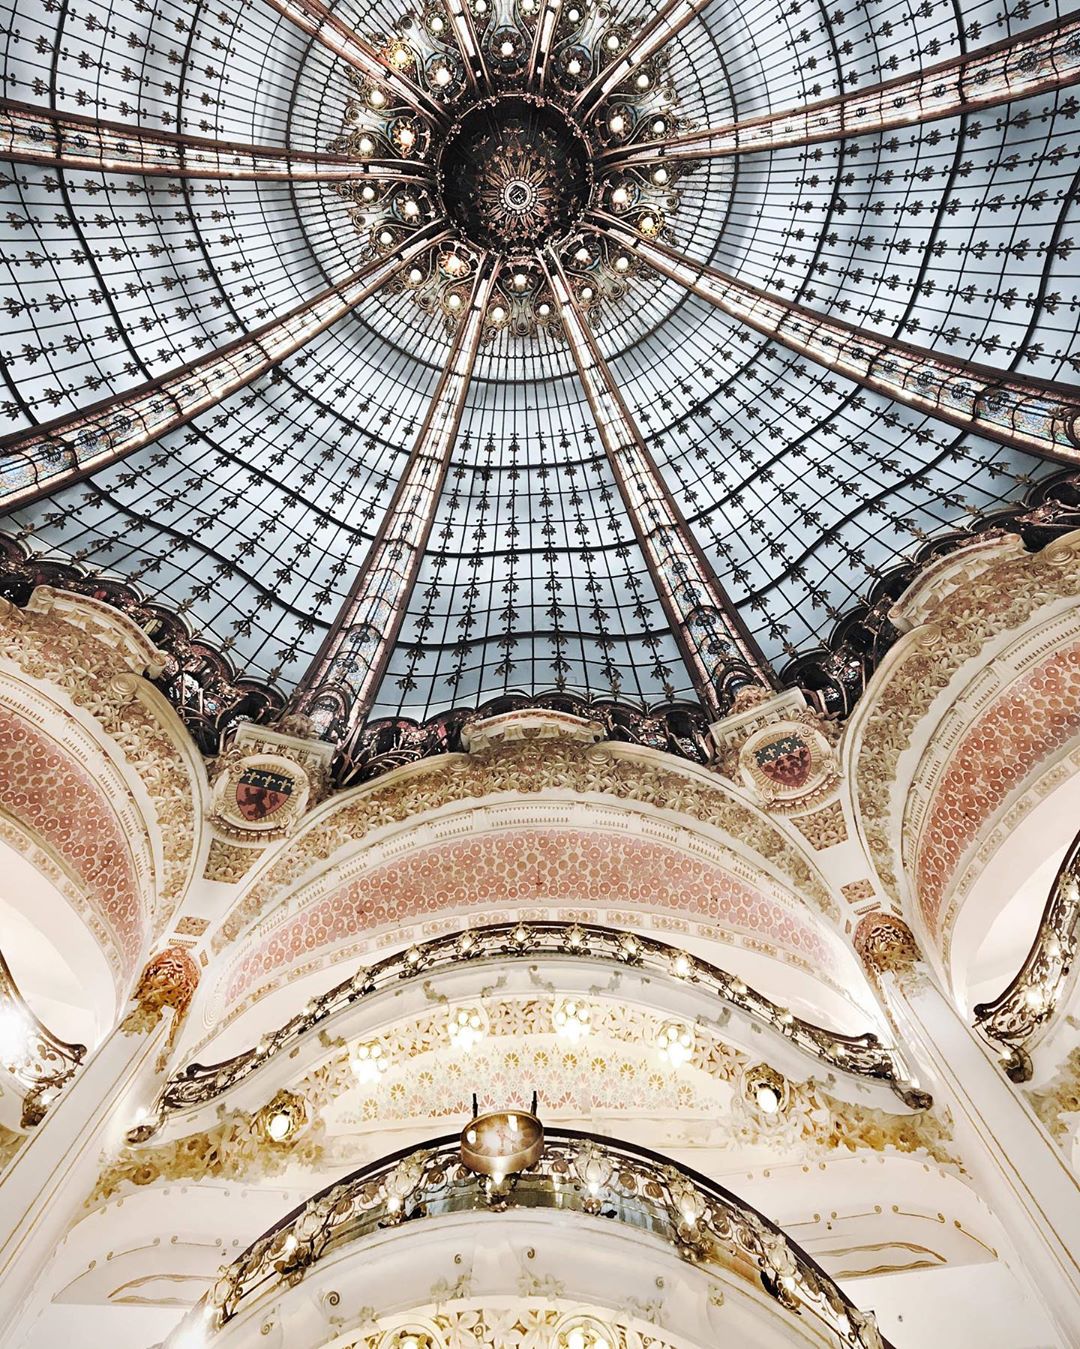 Under the dome of the Galeries Lafayette in Paris, France, very nice architecture. (Nos Dren)